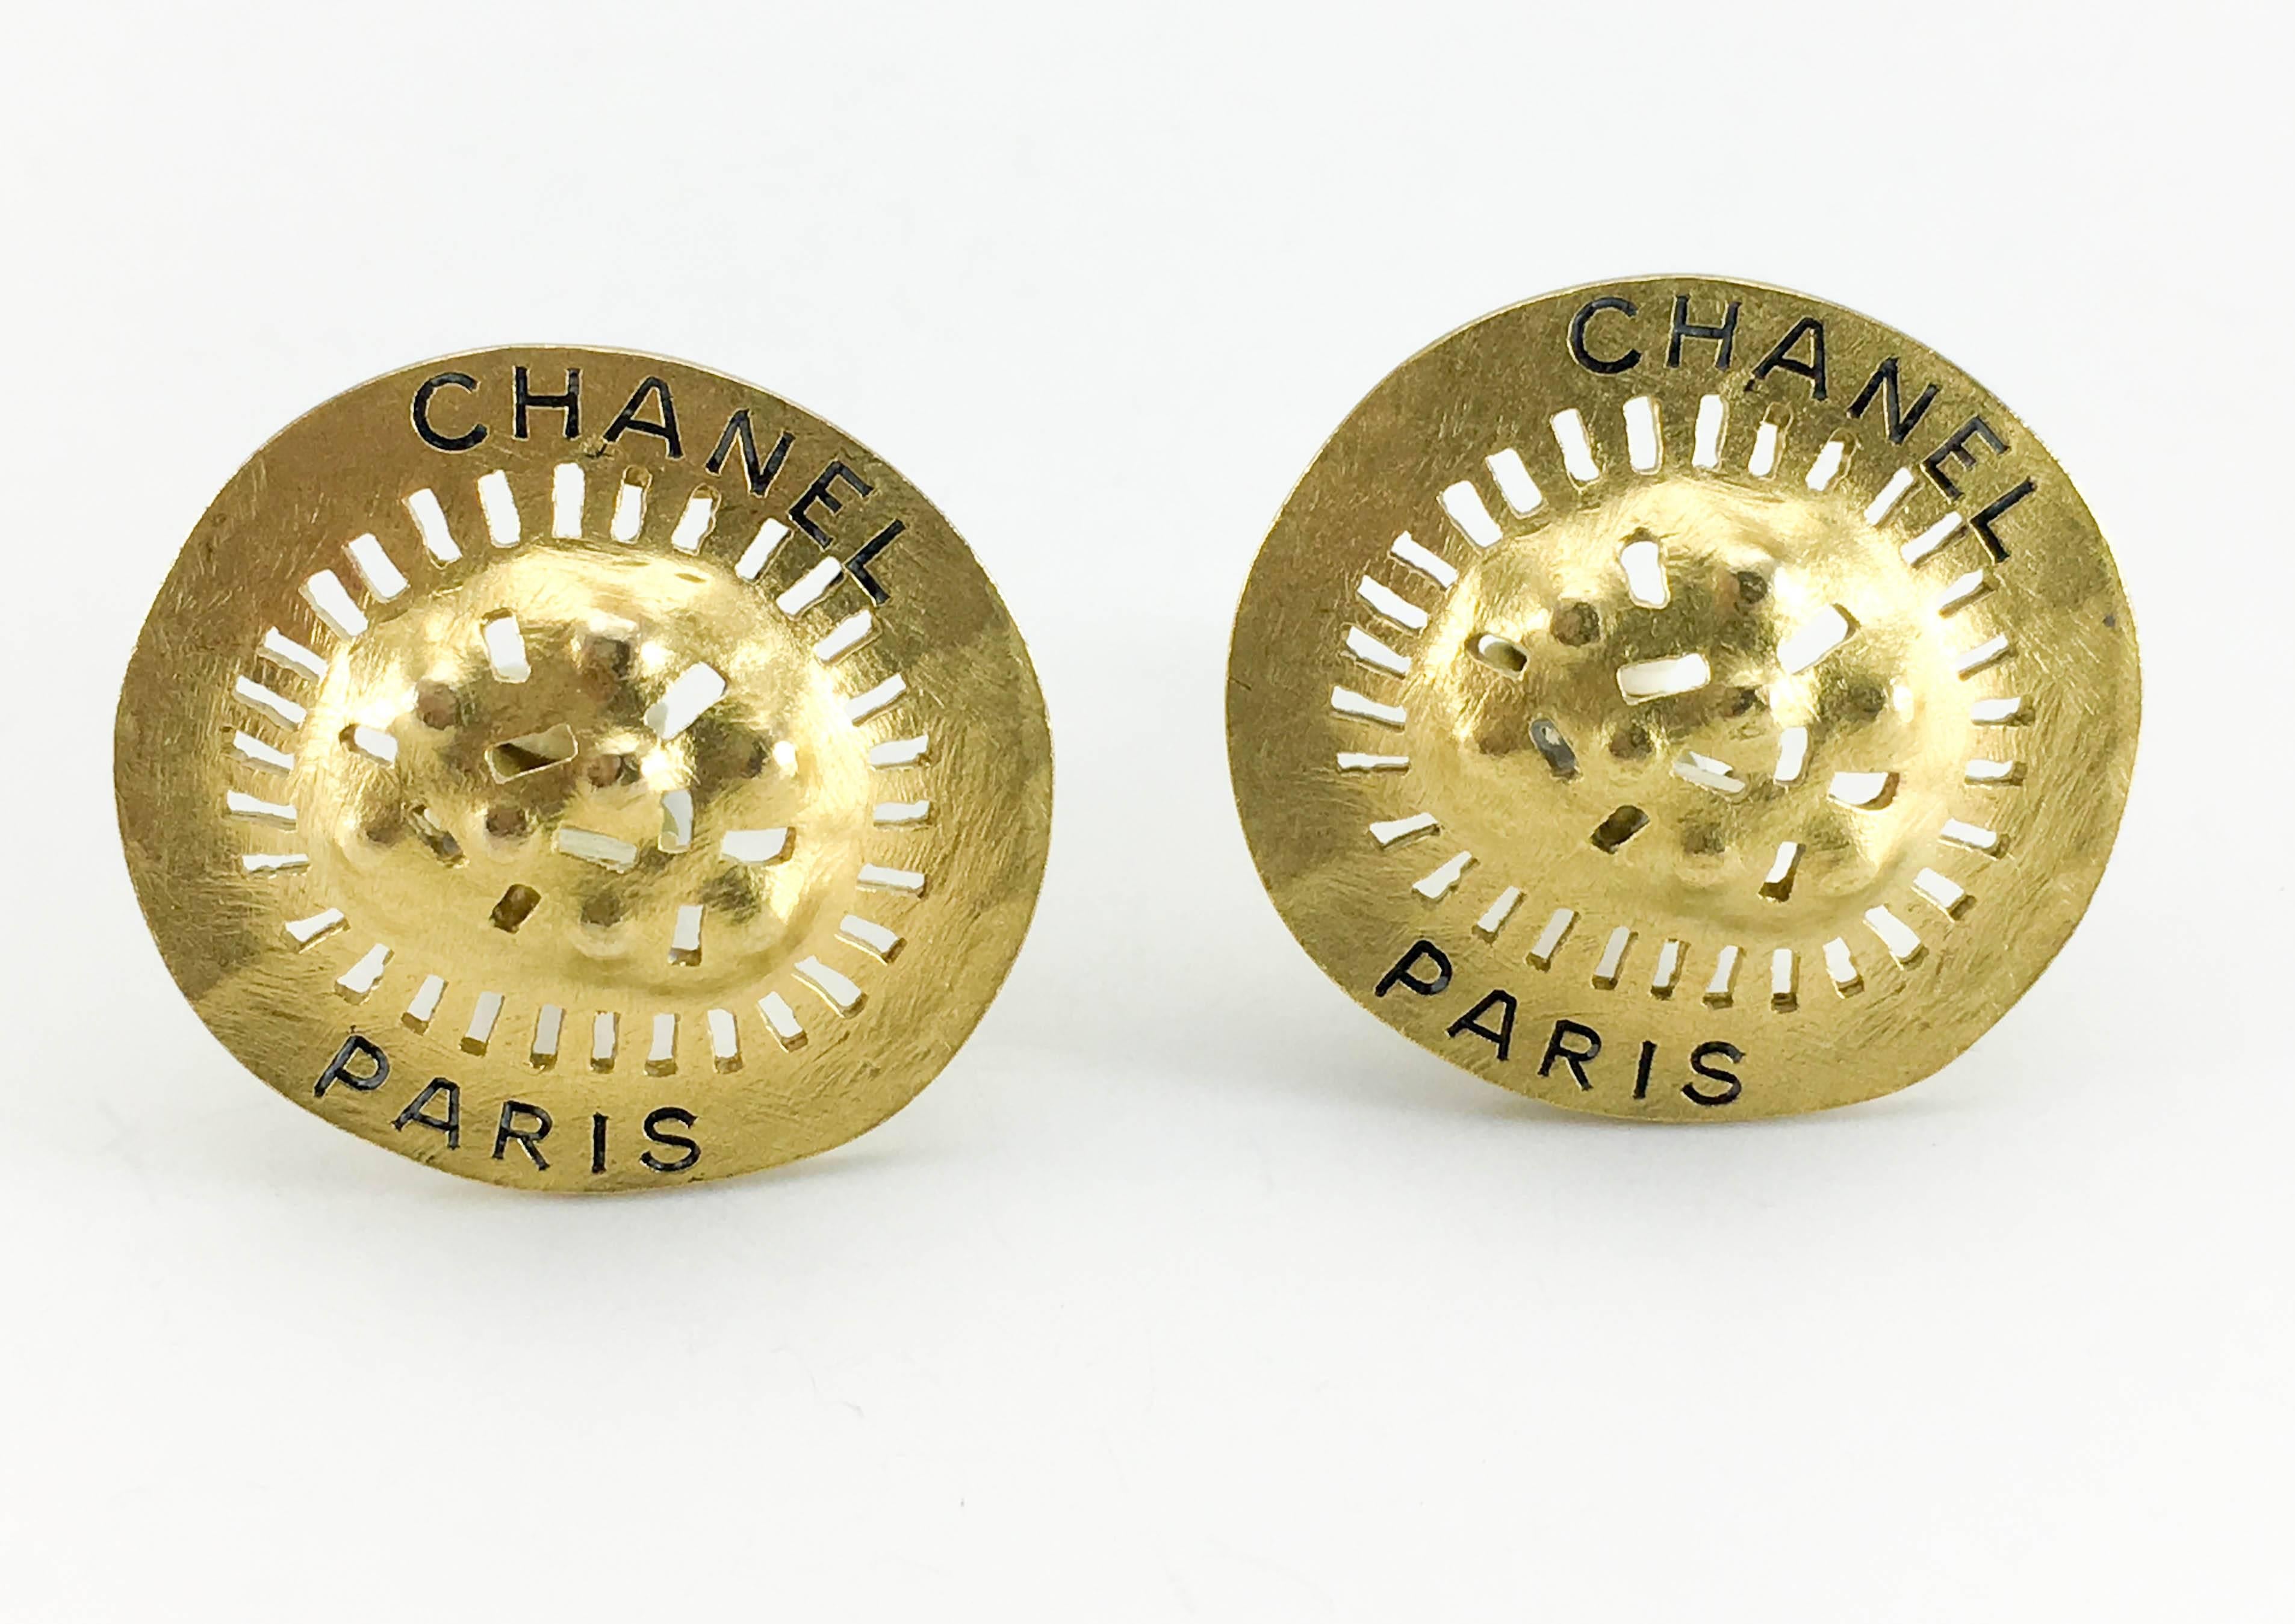 1994 Chanel Shield-Like Medallion Gilt Earrings  In Excellent Condition For Sale In London, Chelsea